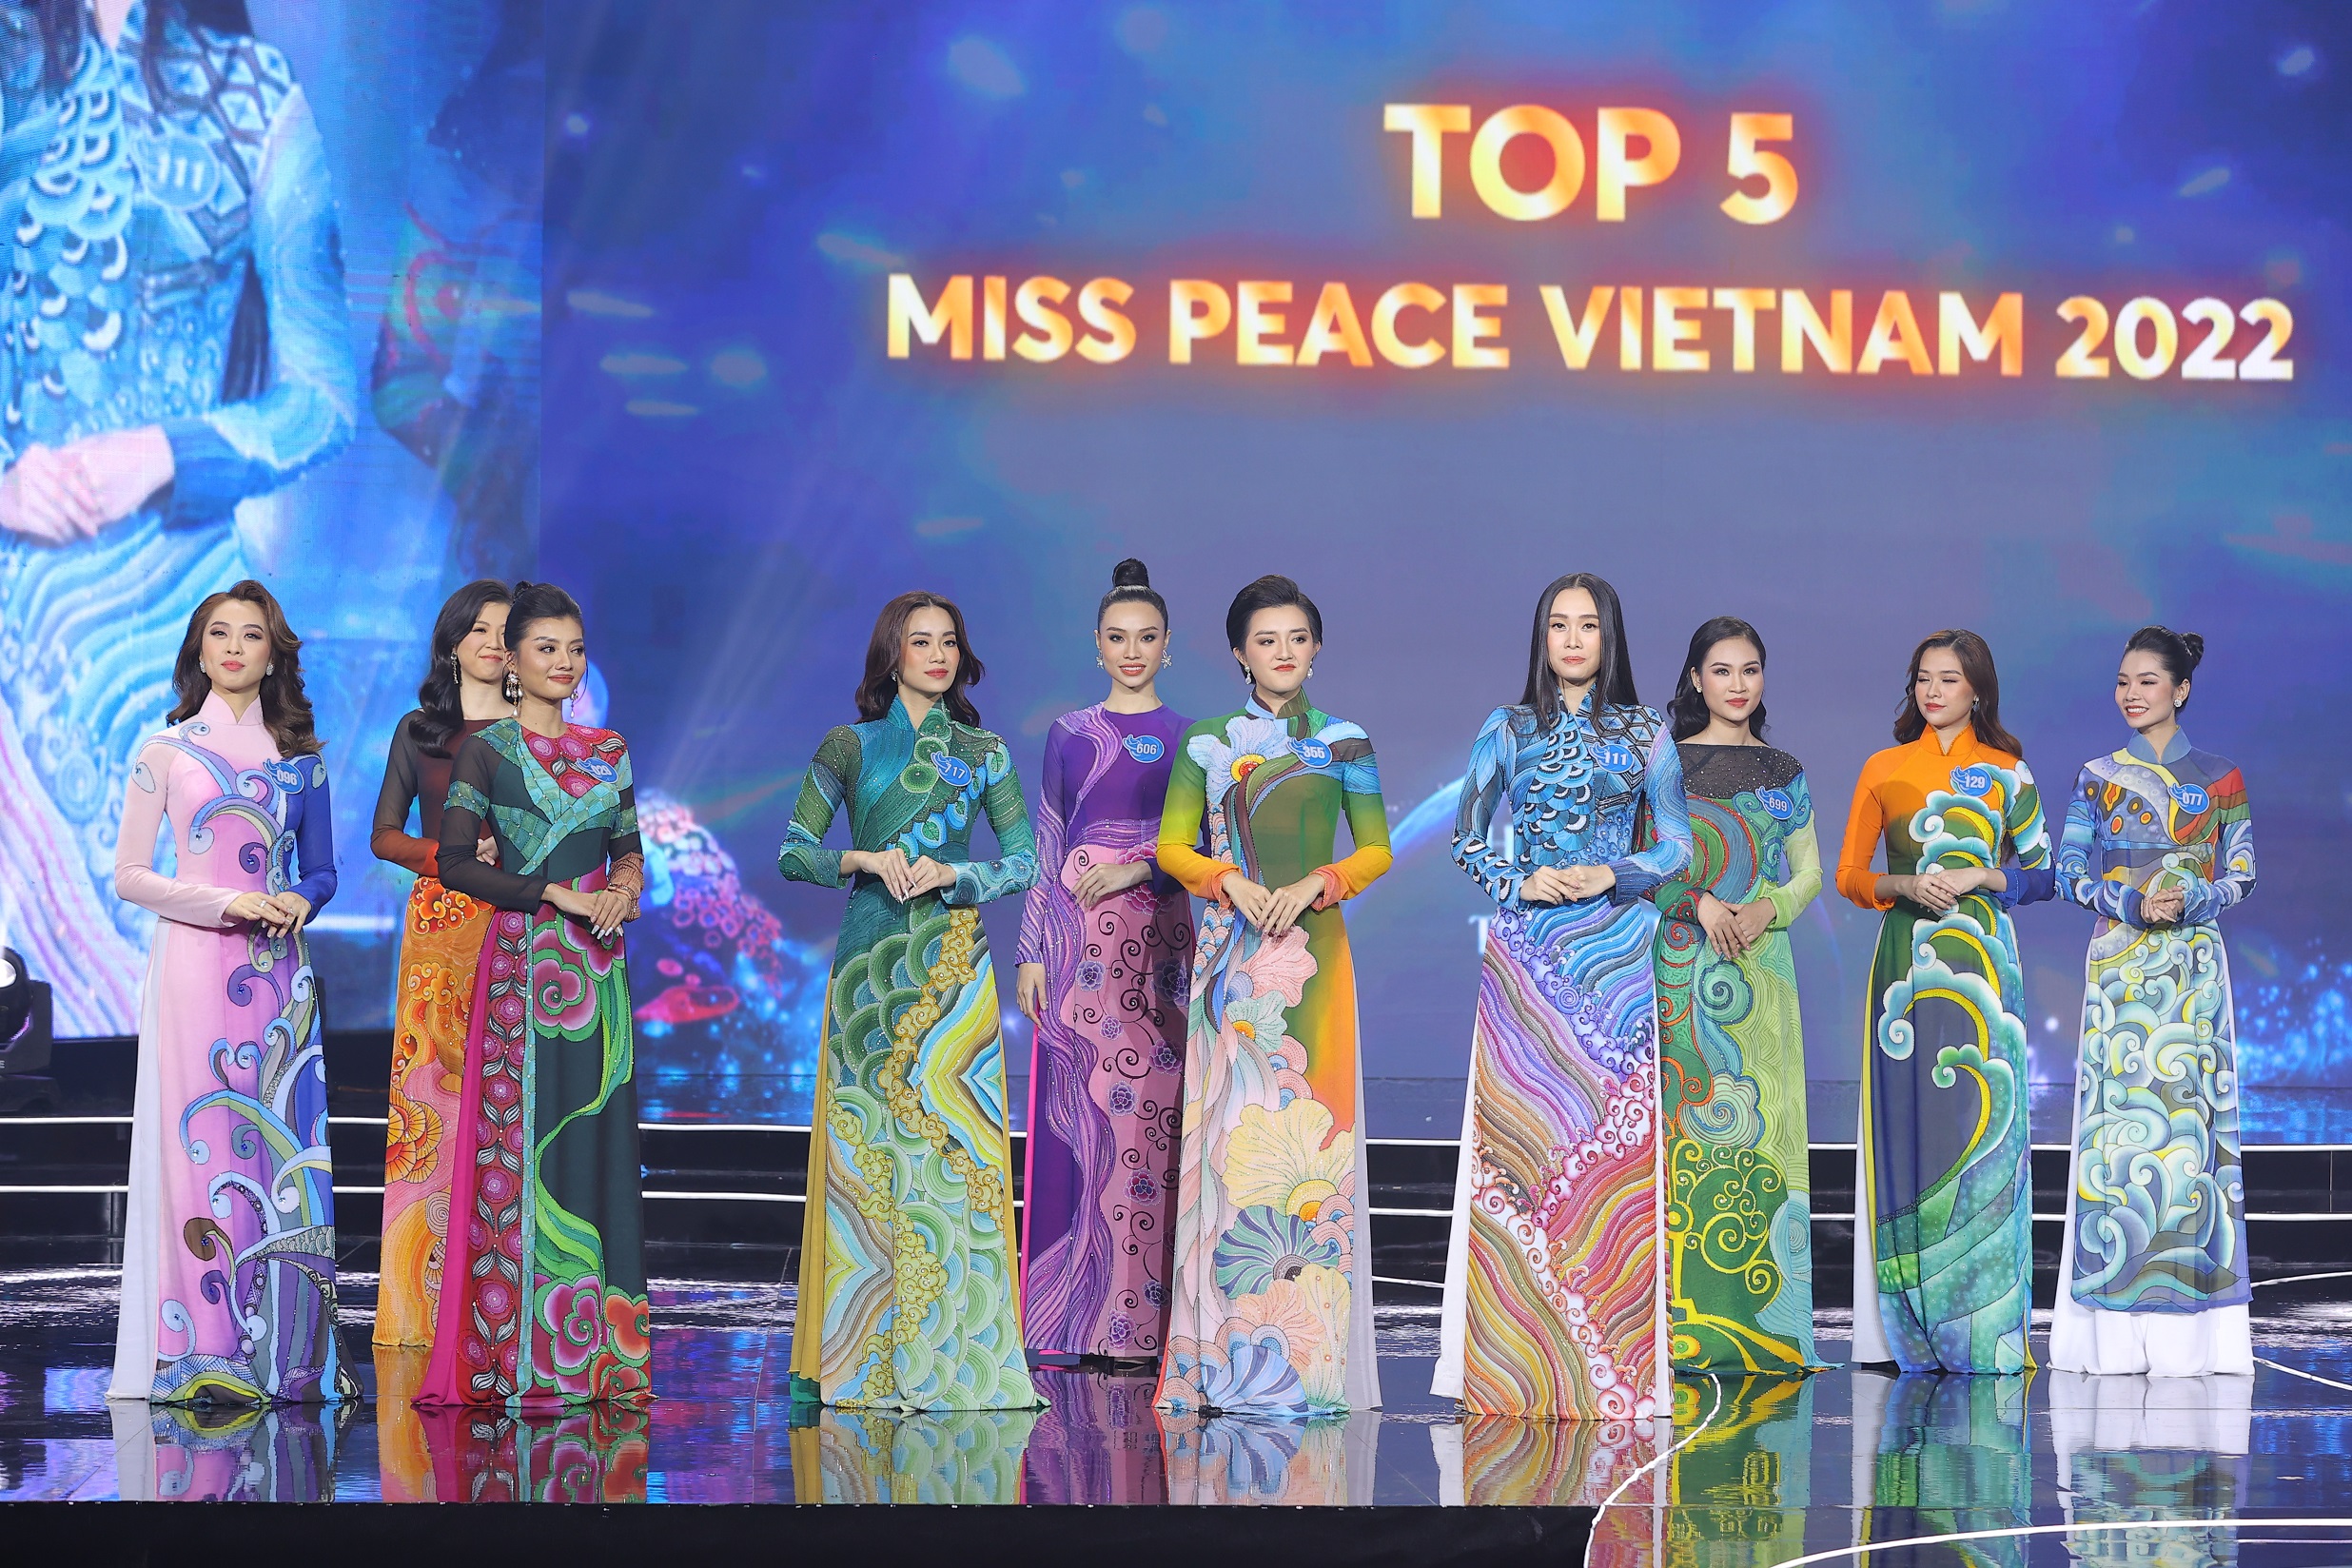 The top 5 contenders stand in the front line after being selected to the question section at the finale of Miss Peace Vietnam 2022 in Da Nang City, September 11, 2022. Photo: Tuoi Tre